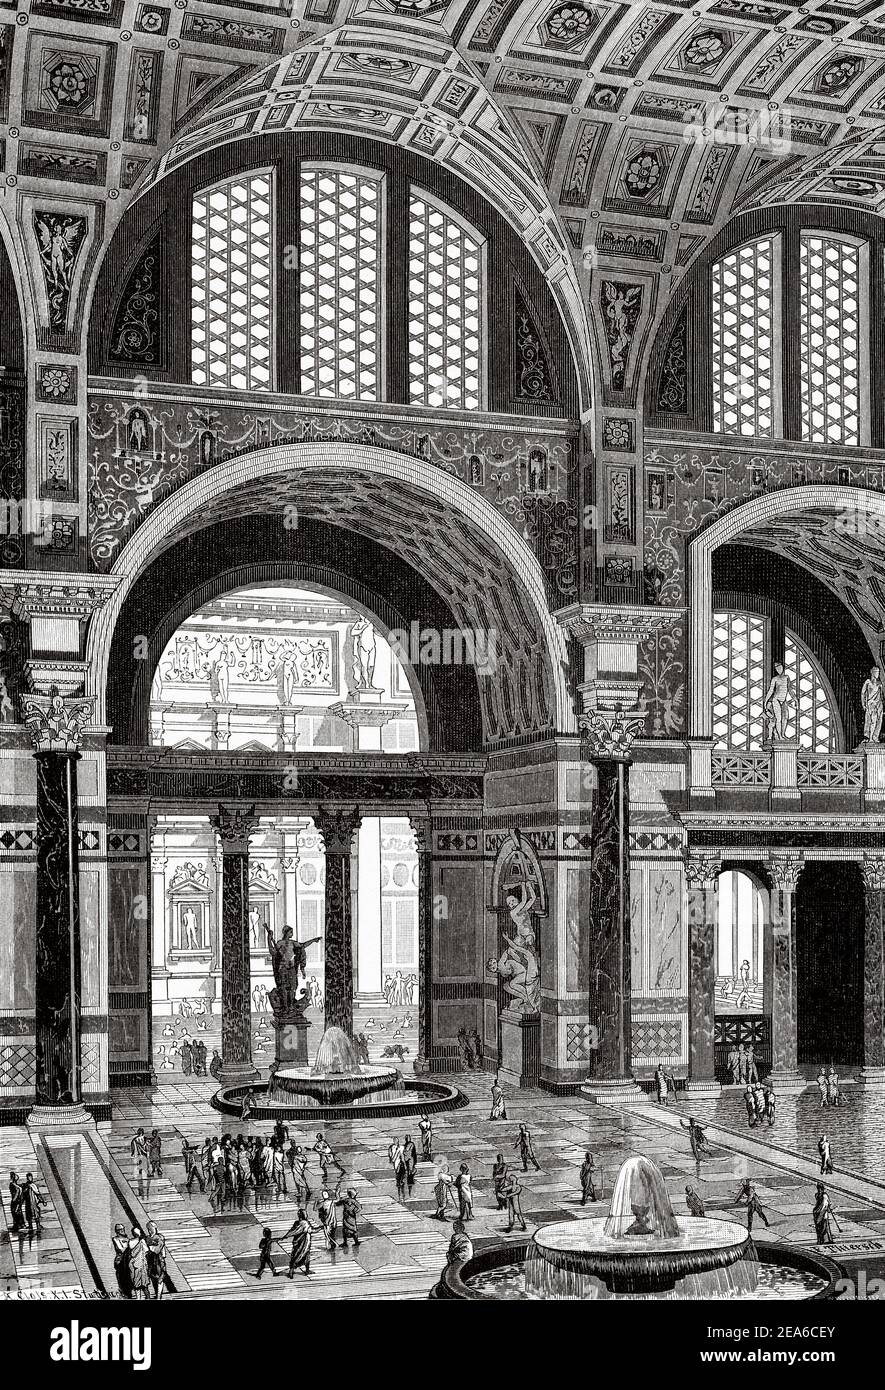 Artistic recreation of the Baths of Caracalla. Antonine Baths, public baths of imperial Rome under the government of Emperor Caracalla, Ancient Rome History. Old 19th century engraved illustration from El Mundo Ilustrado 1879 Stock Photo